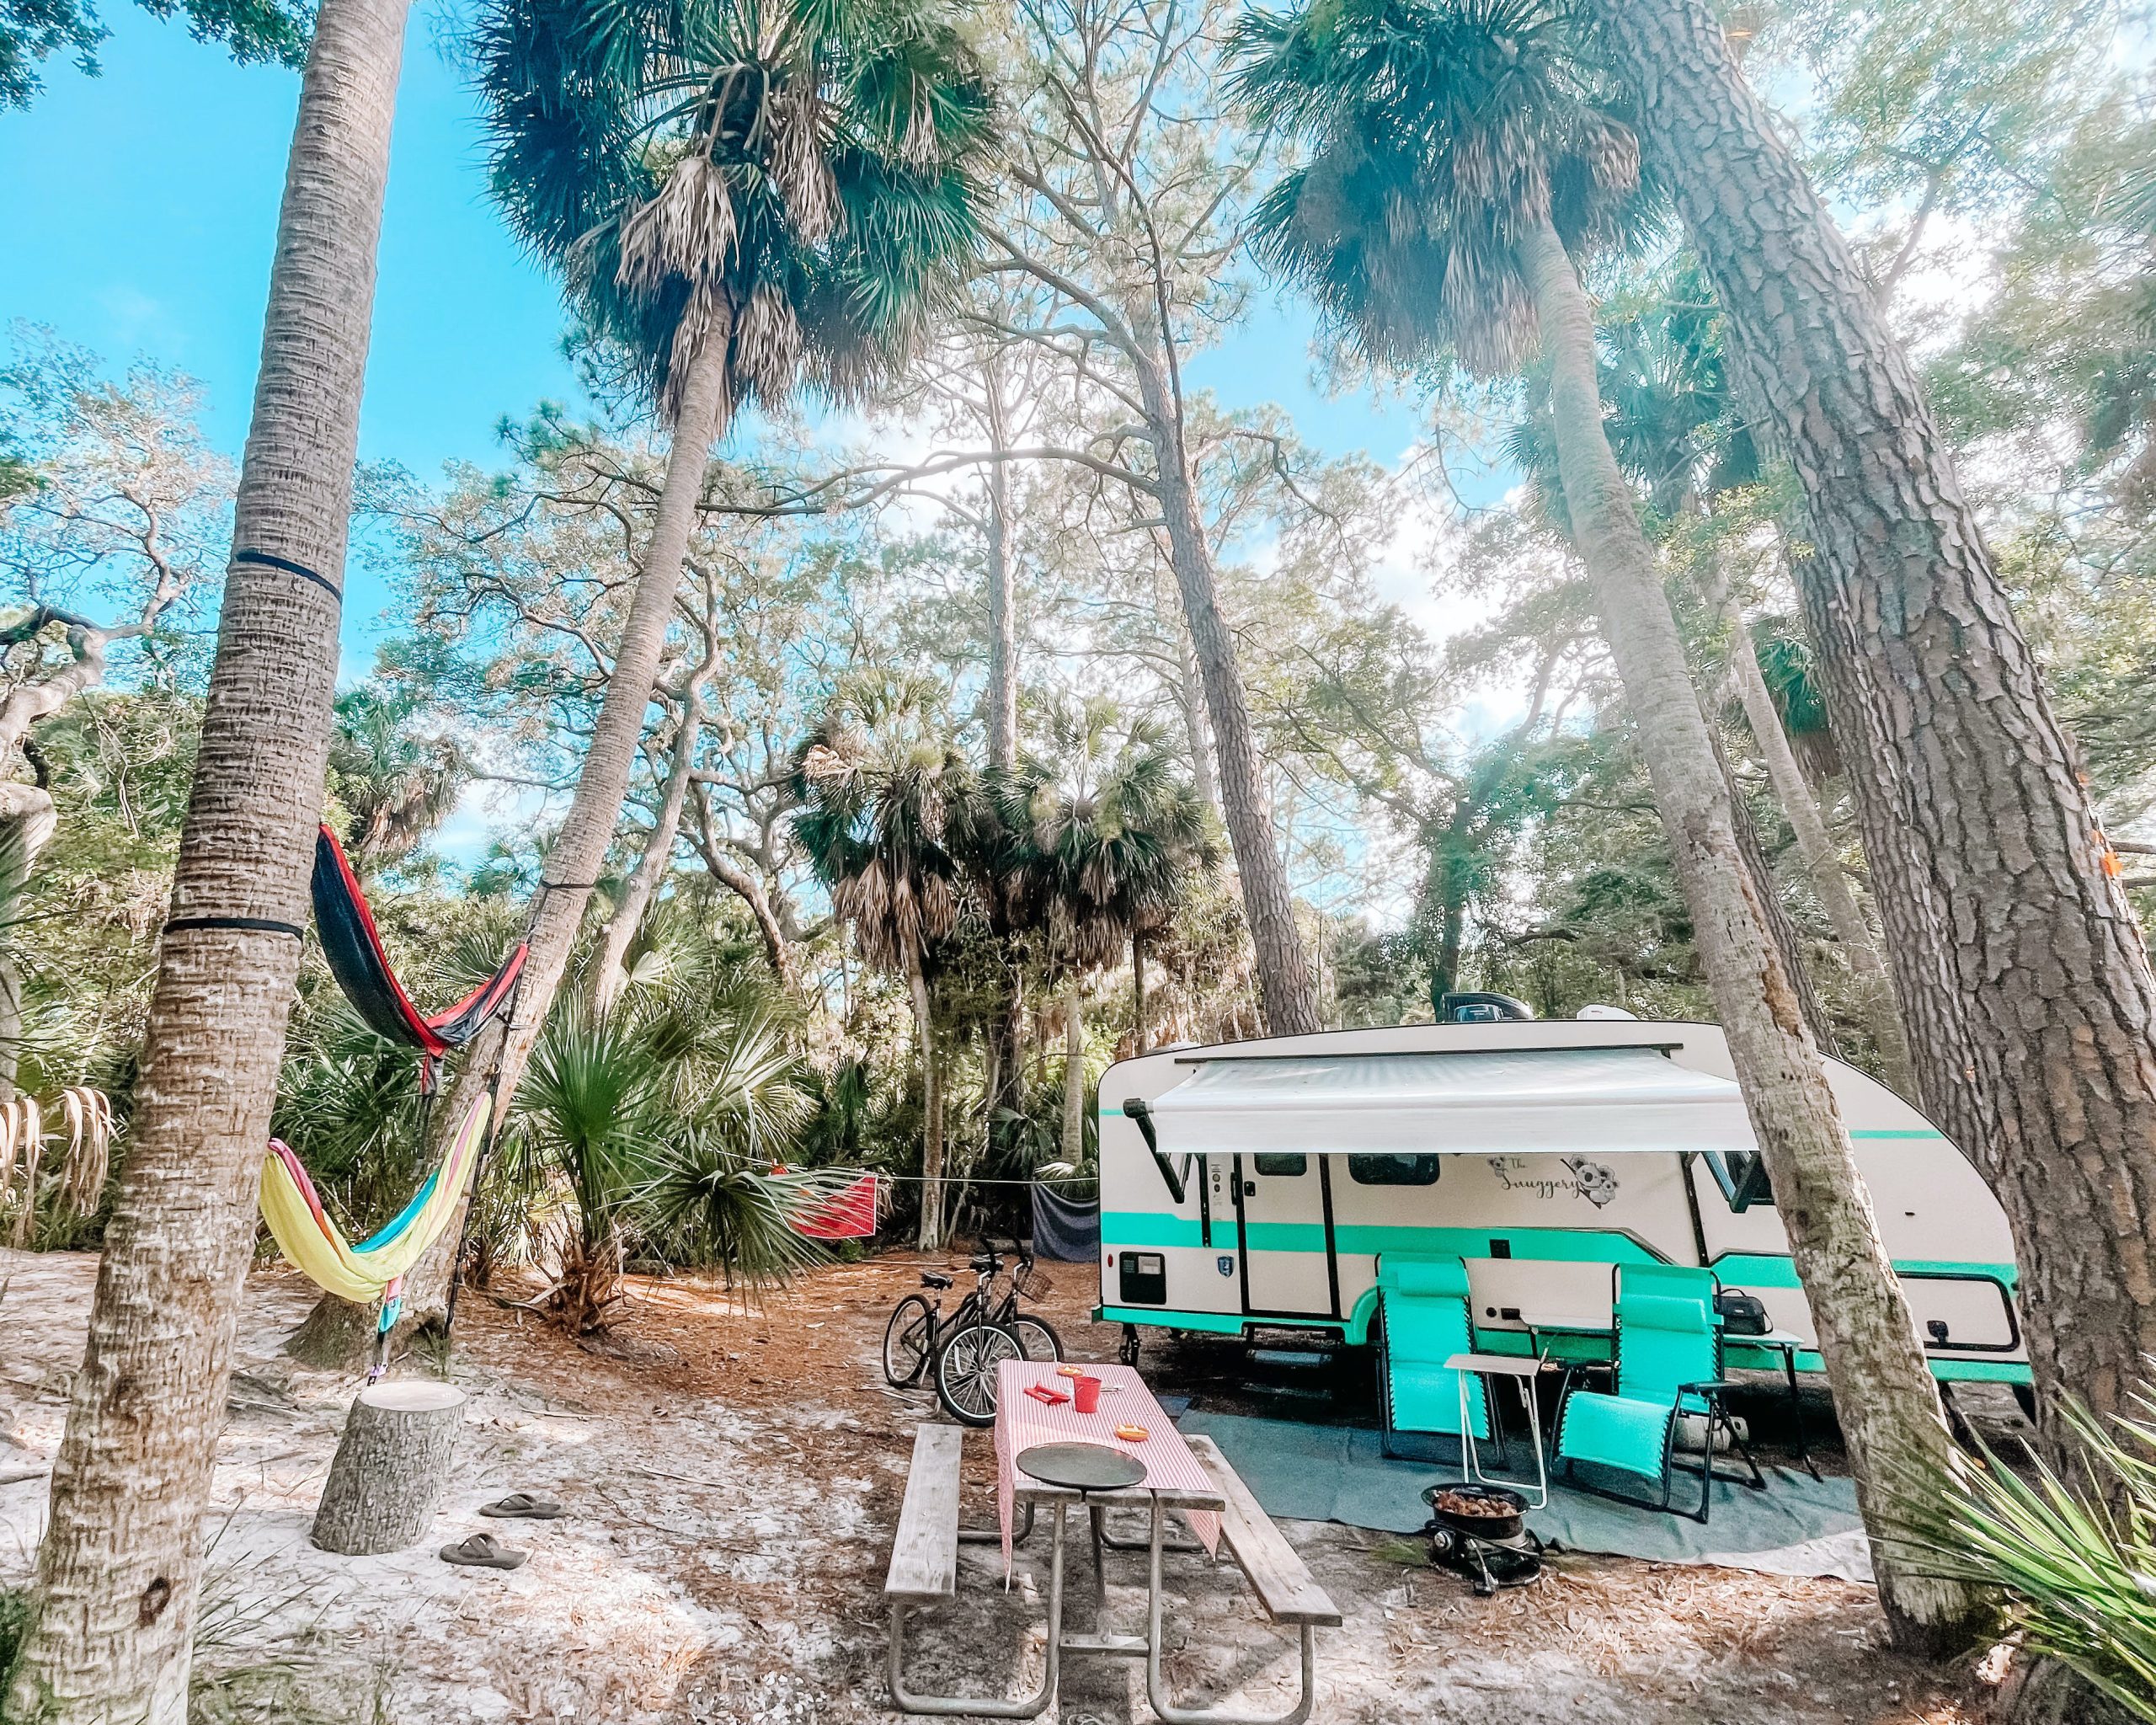 Camper Parking - camping in the lowcountry